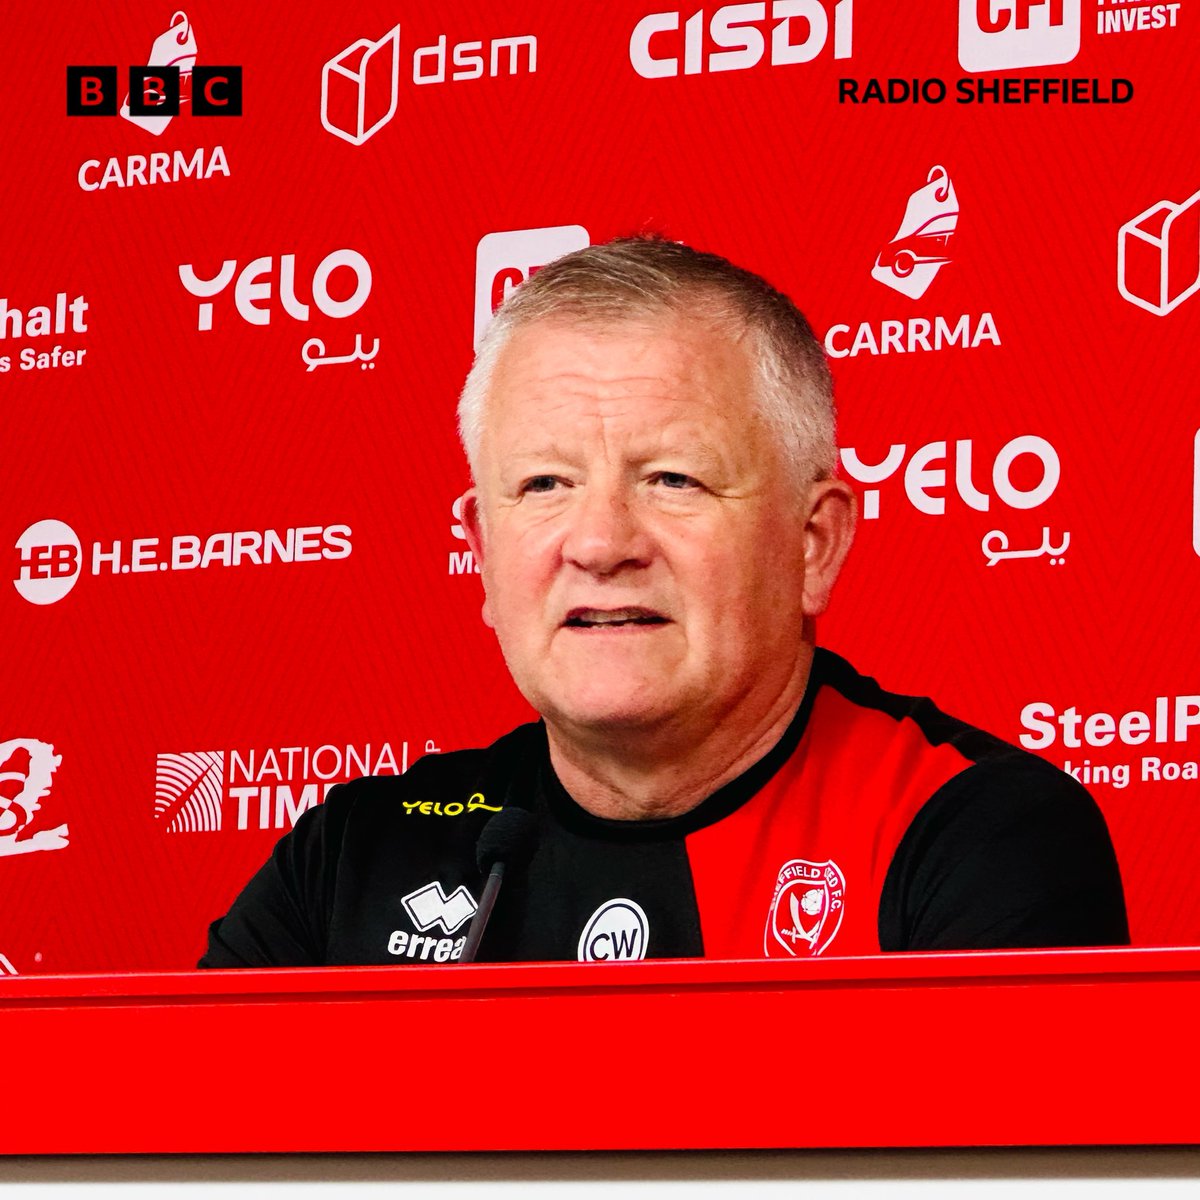 Chris Wilder says he and new recruitment team of Mike Allen & Jamie Hoyland face “one of the most important recruitment periods” at Sheffield United. Wilder spoke to the extent of the changes coming, which will be significant. Interview online shortly #SUFC